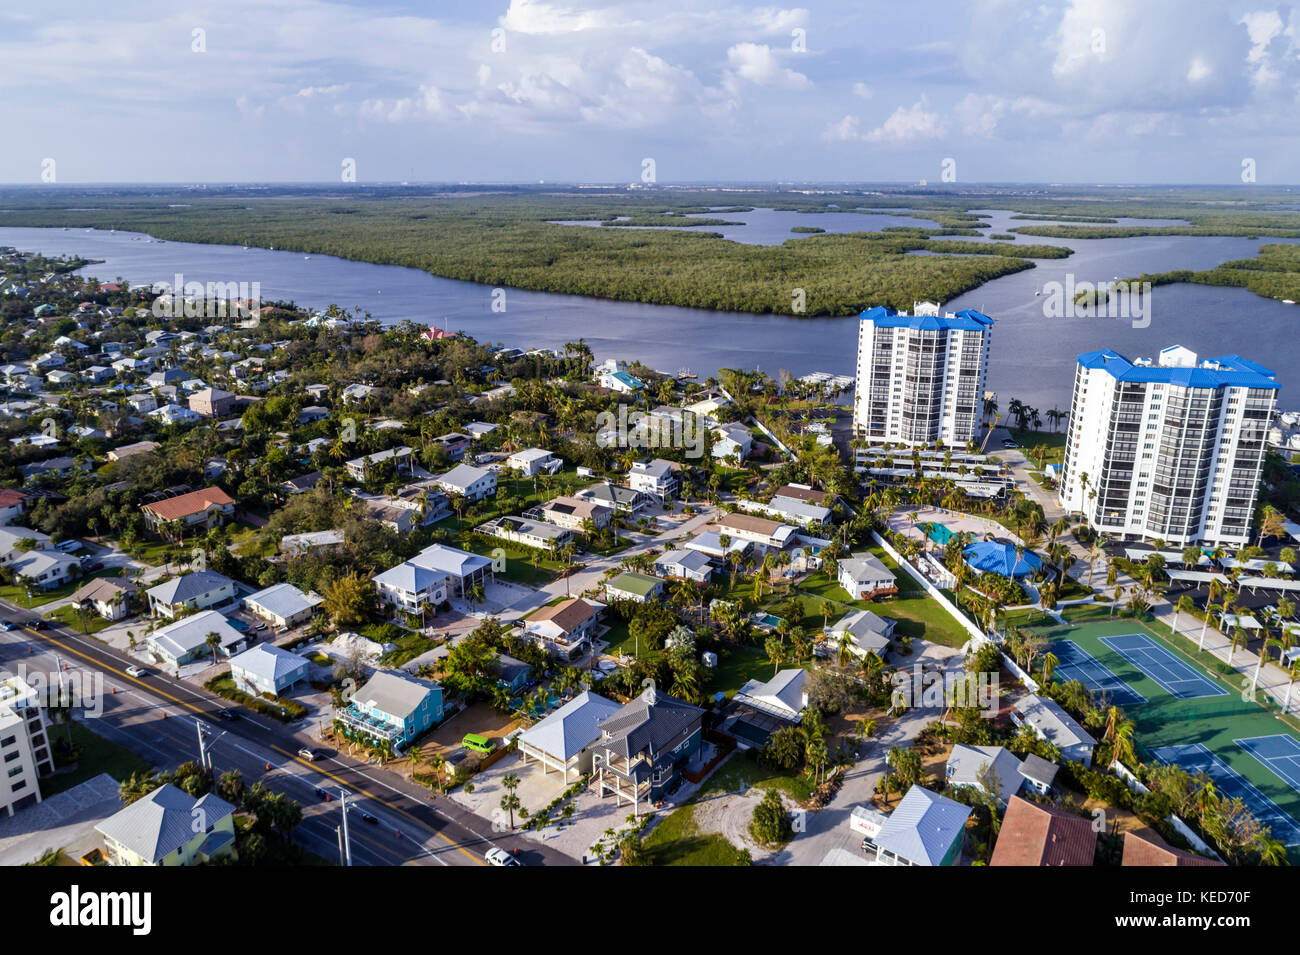 Fort Ft. Myers Beach Florida,Estero Barrier Island,Estero Bay Aquatic Preserve,Ostego Bay,aerial overhead view,water,residential apartment buildings,r Stock Photo